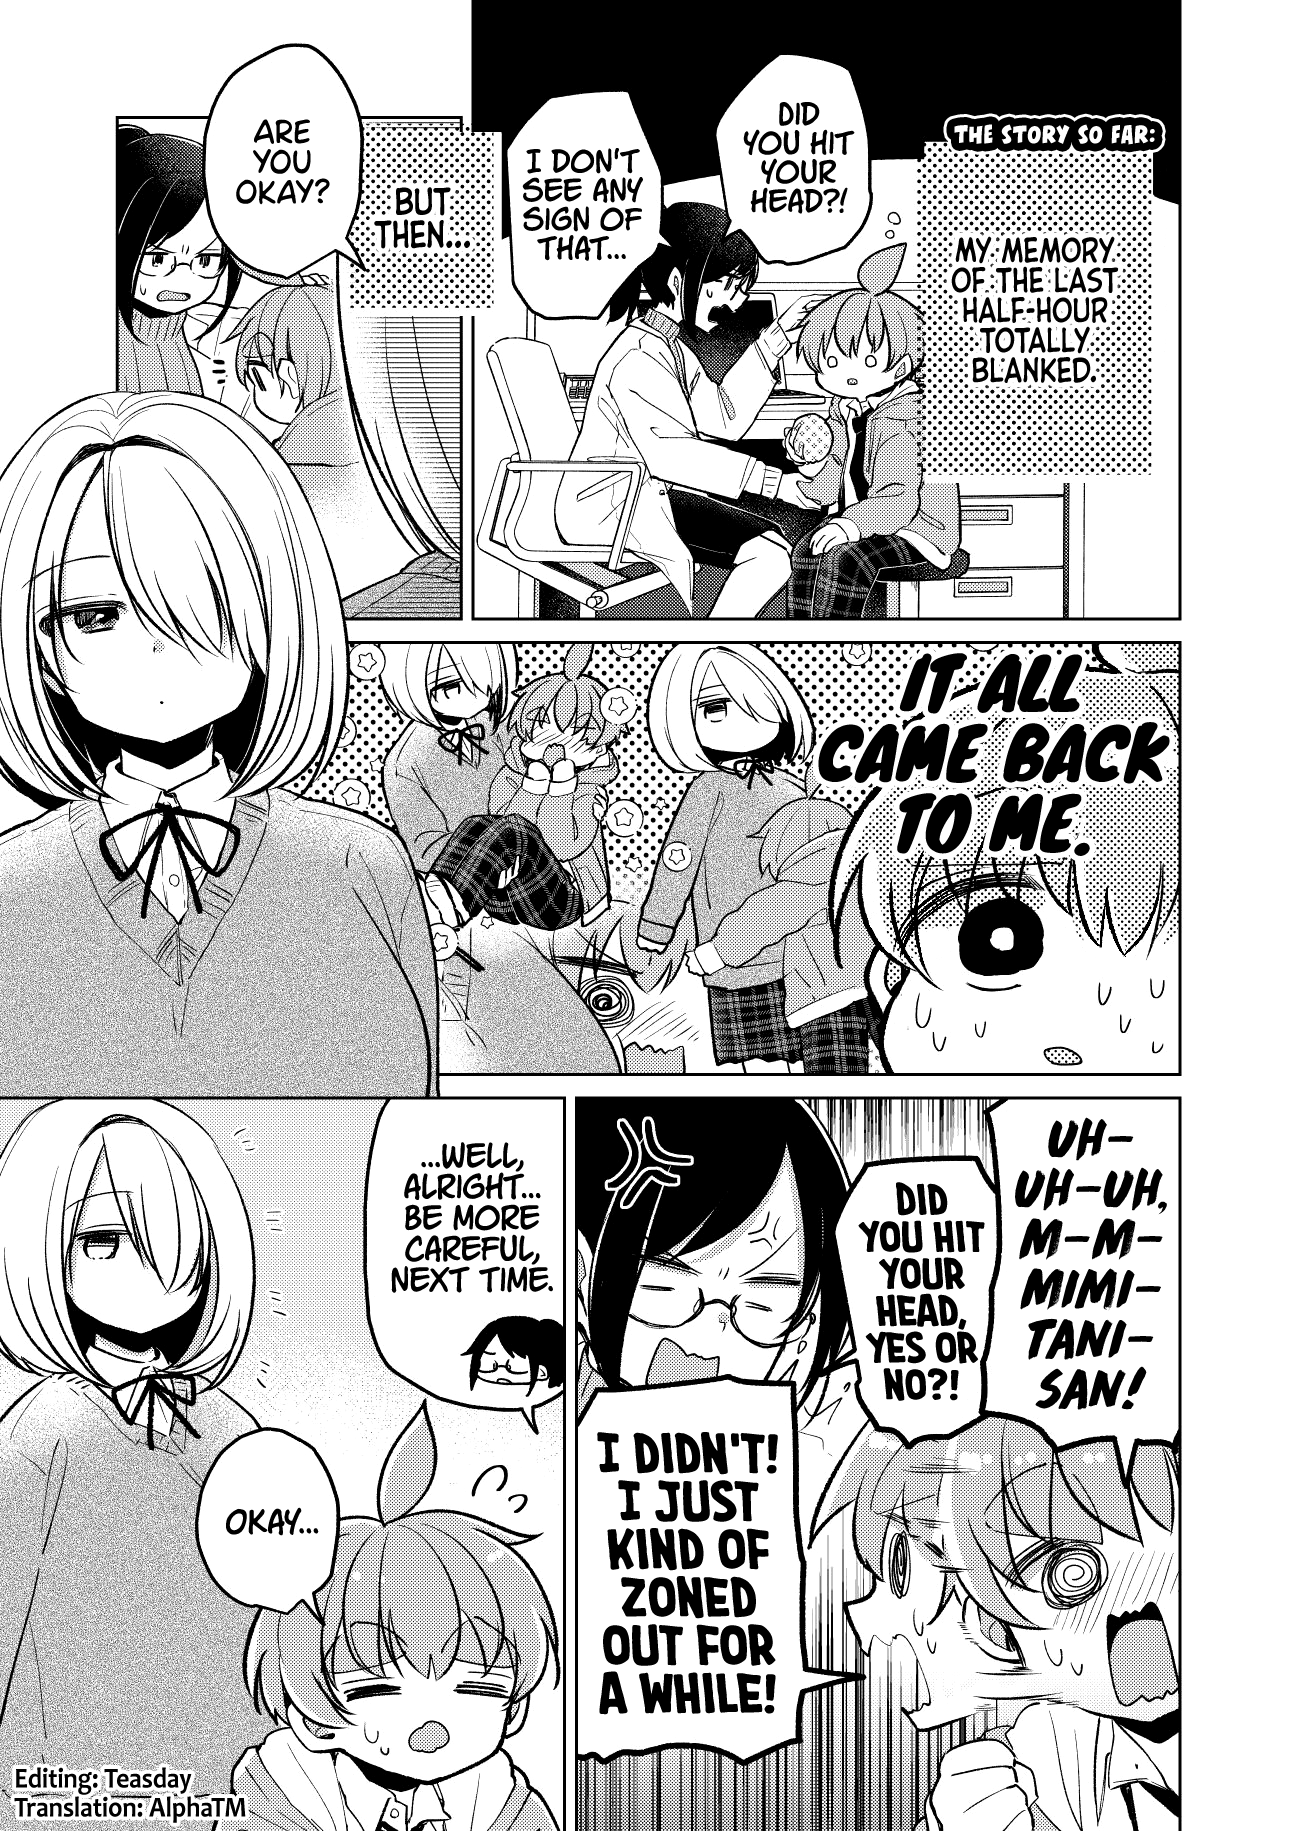 Mimitani-San, The Tallest In The Class - chapter 5 - #1